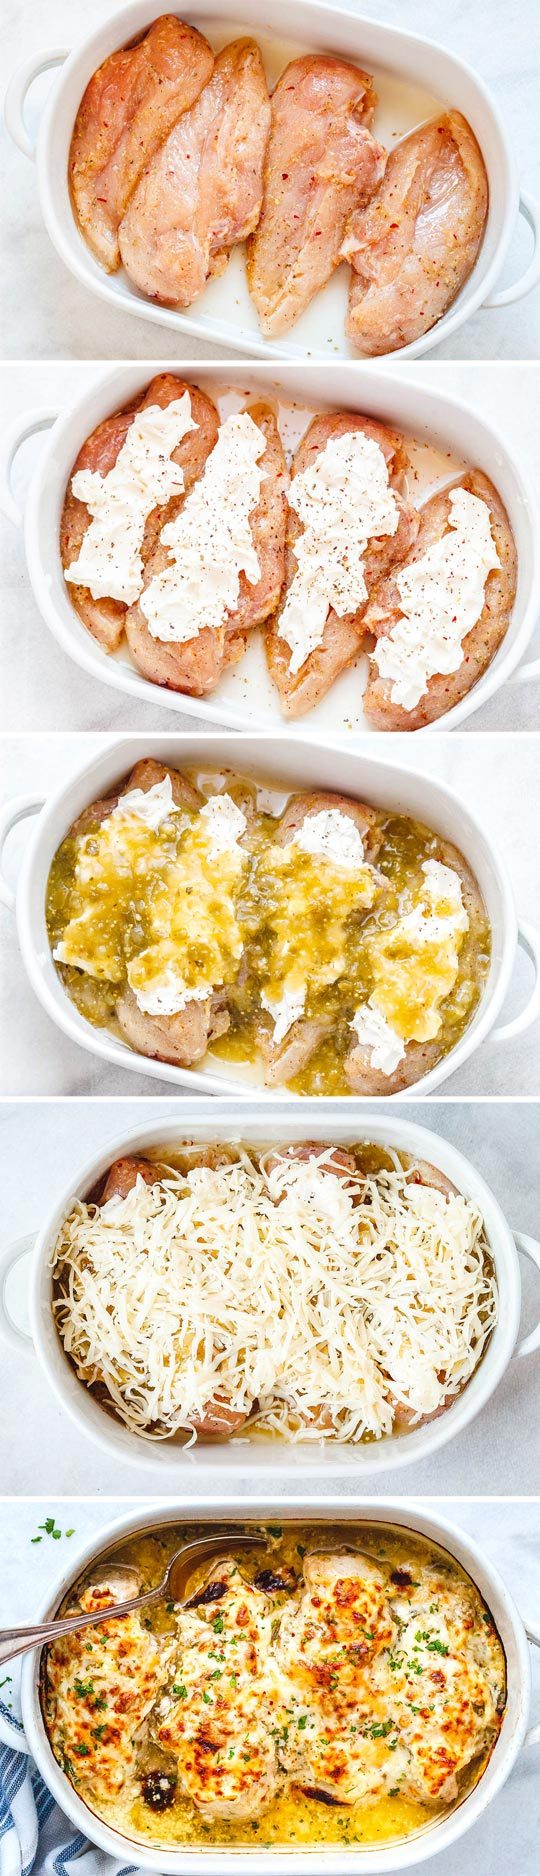 Salsa Verde Chicken Casserole with Cream Cheese and Mozzarella - #eatwell101 #recipe  Loaded with flavor and so comforting, it’s seriously good chicken! 
Salsa Verde #Chicken #Casserole  #CreamCheese #Mozzarella  #keto friendly, #glutenfree, #lowcarb